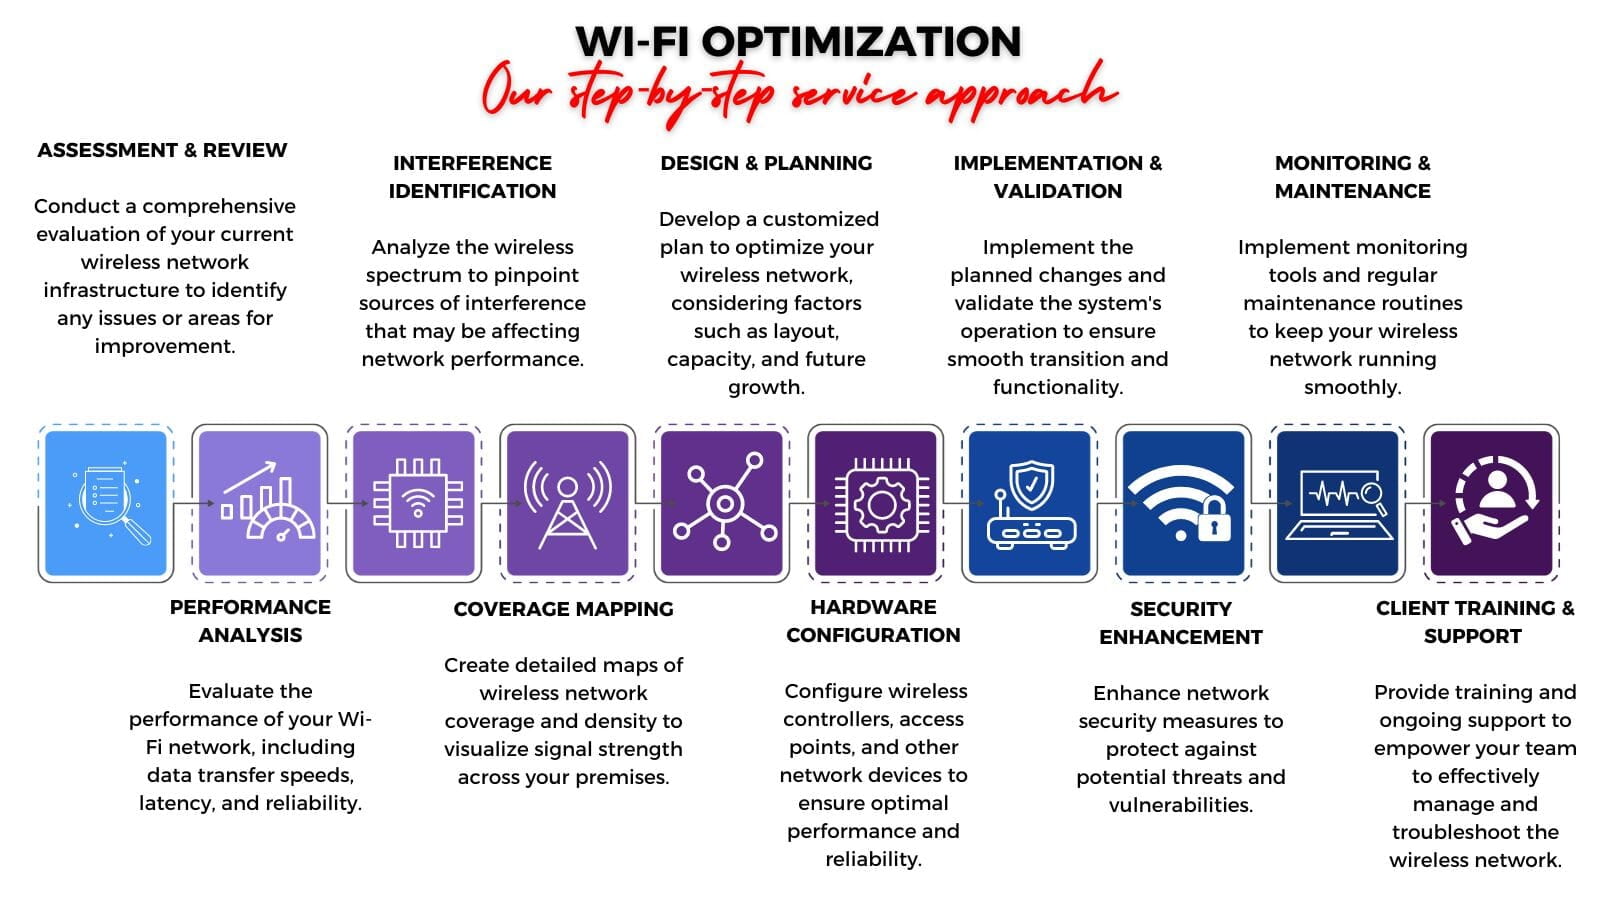 Wi-Fi Optimization Our Step-by-Step Service Approach